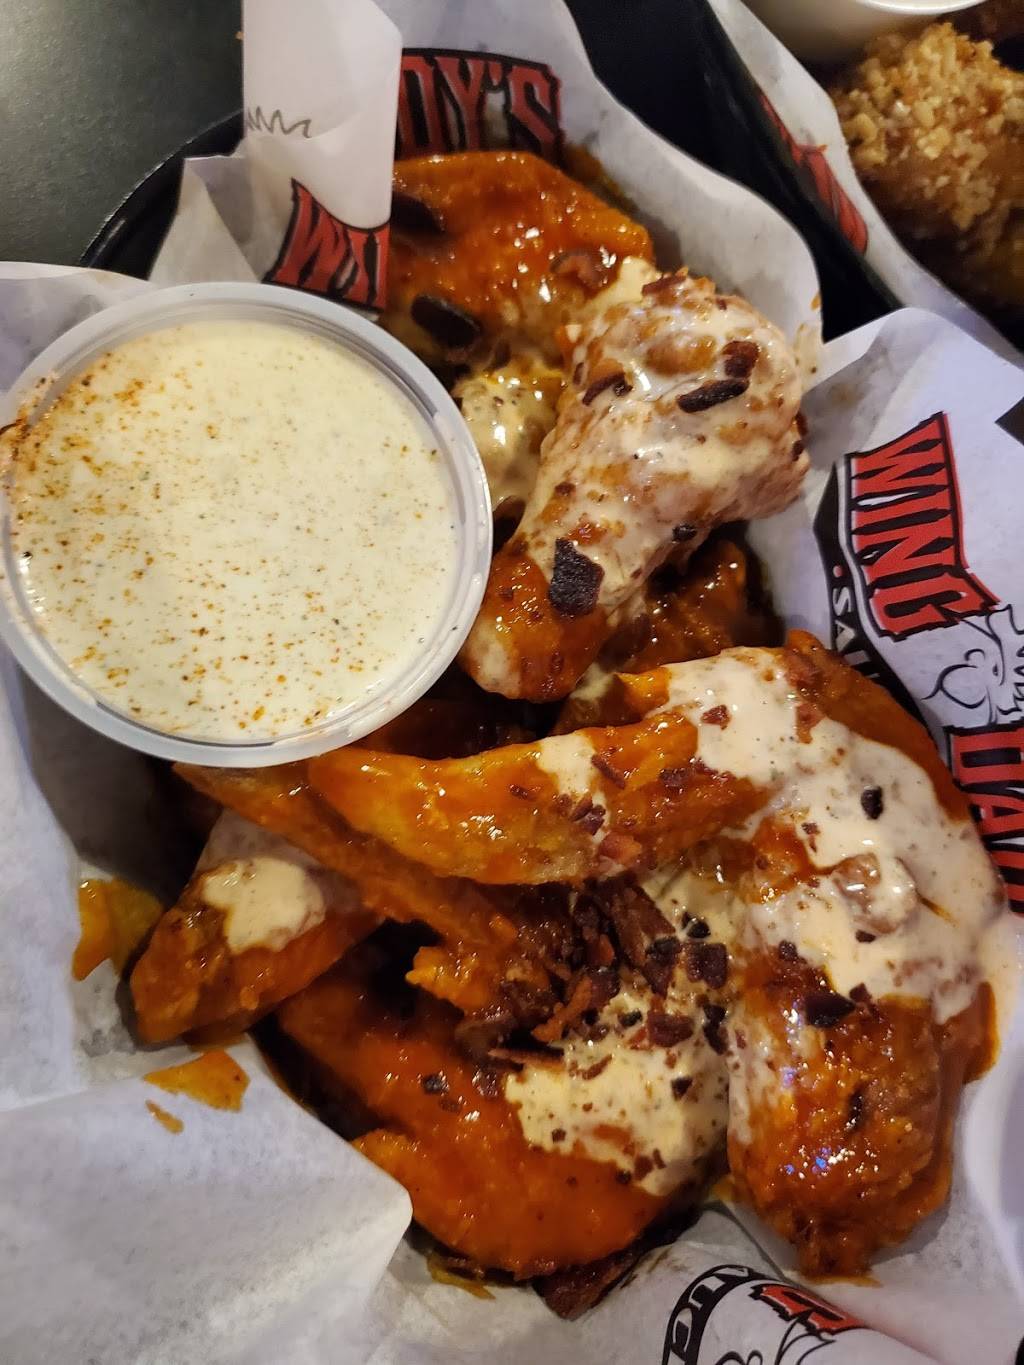 Wing Daddys Sauce House | 12302 Montana Ave Ste. 301, El Paso, TX 79936, USA | Phone: (915) 855-9464